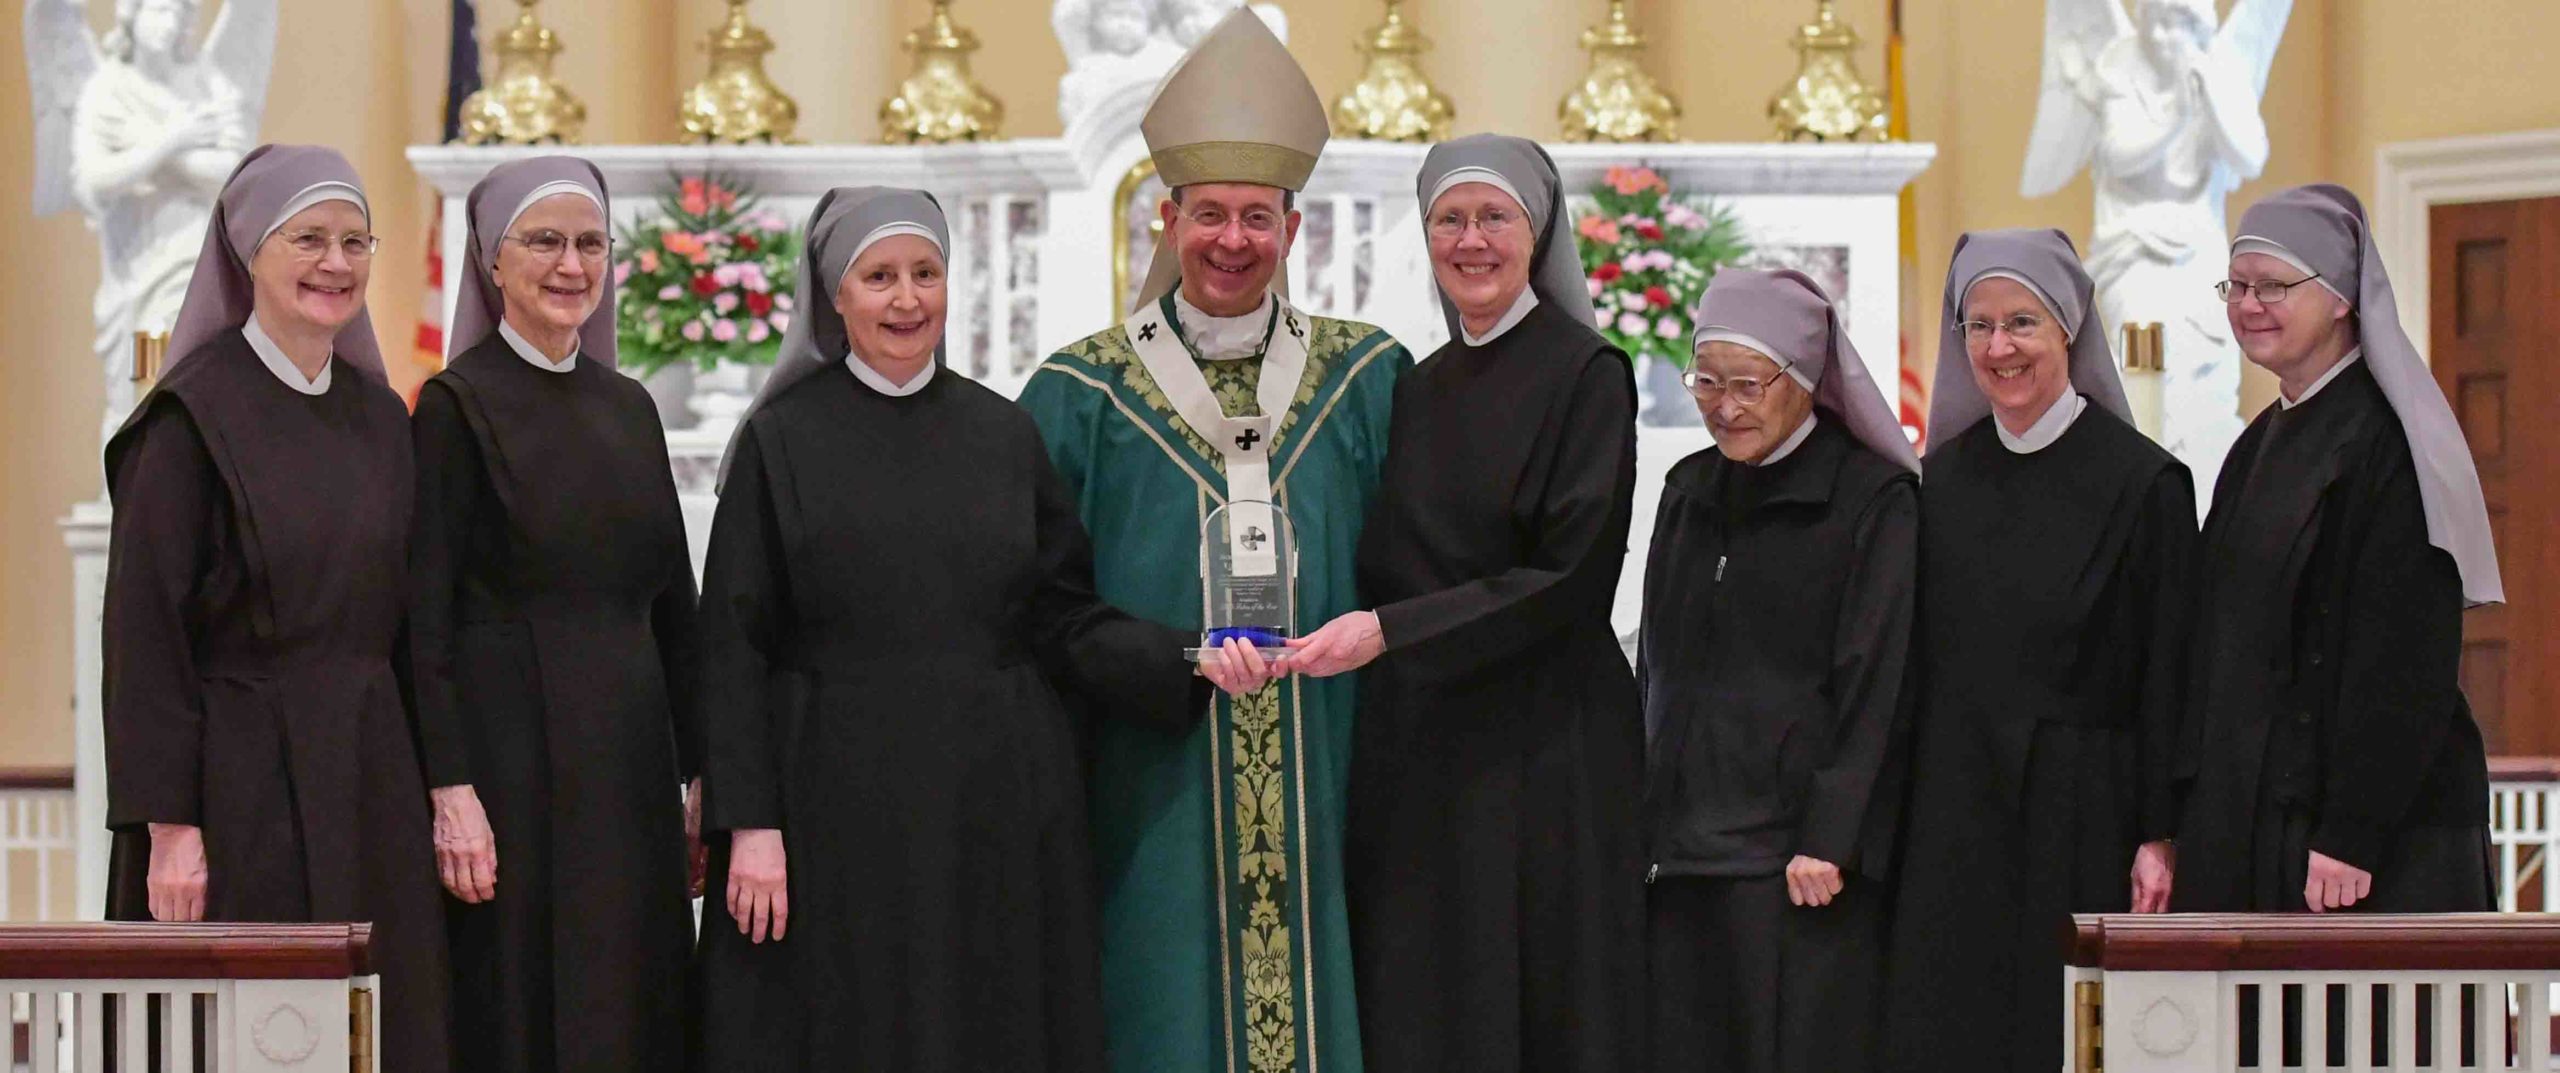 Little Sisters of the Poor believe they were robbed after Christmas shopping